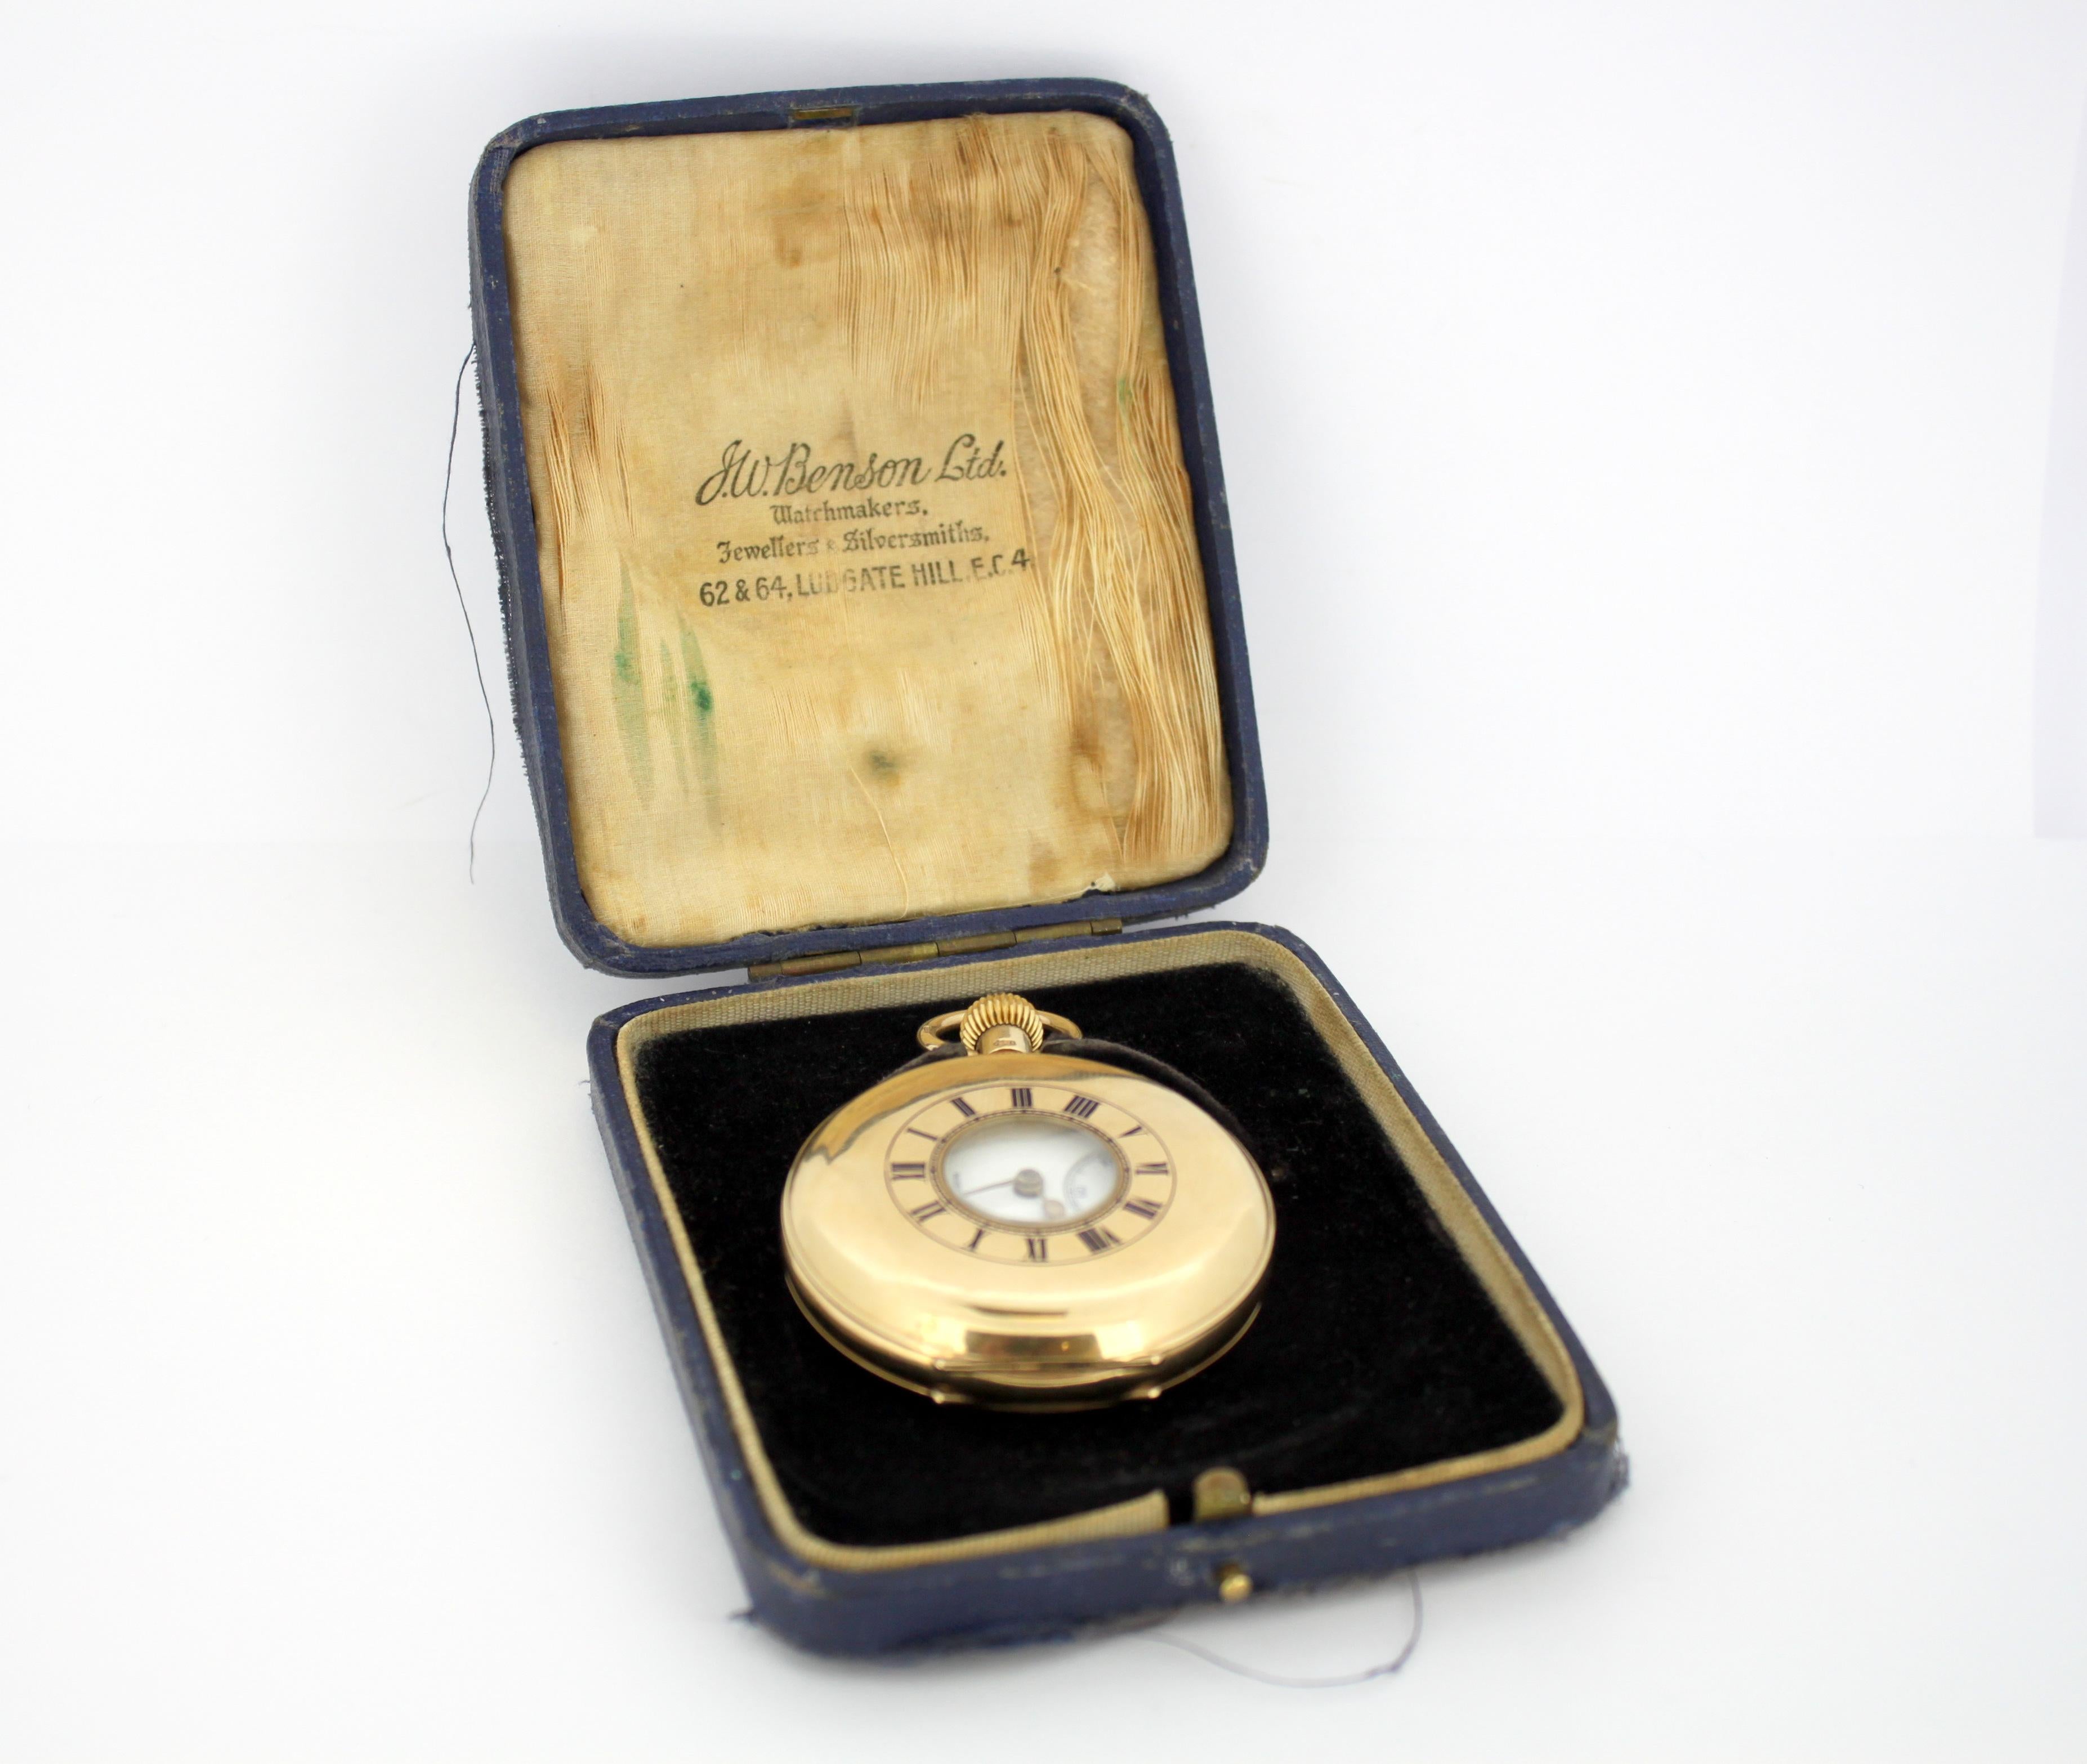 Antique JW Benson pocket watch set in 9kt yellow gold.
Made in London 1931
Fully hallmarked
Ref NR : 5155

Dimensions - 
Size : 6.9 x 4.9 x 1.3 cm
Weight : 96 grams

Condition: Pocket watch is pre-owned has surface scratches and some age wear